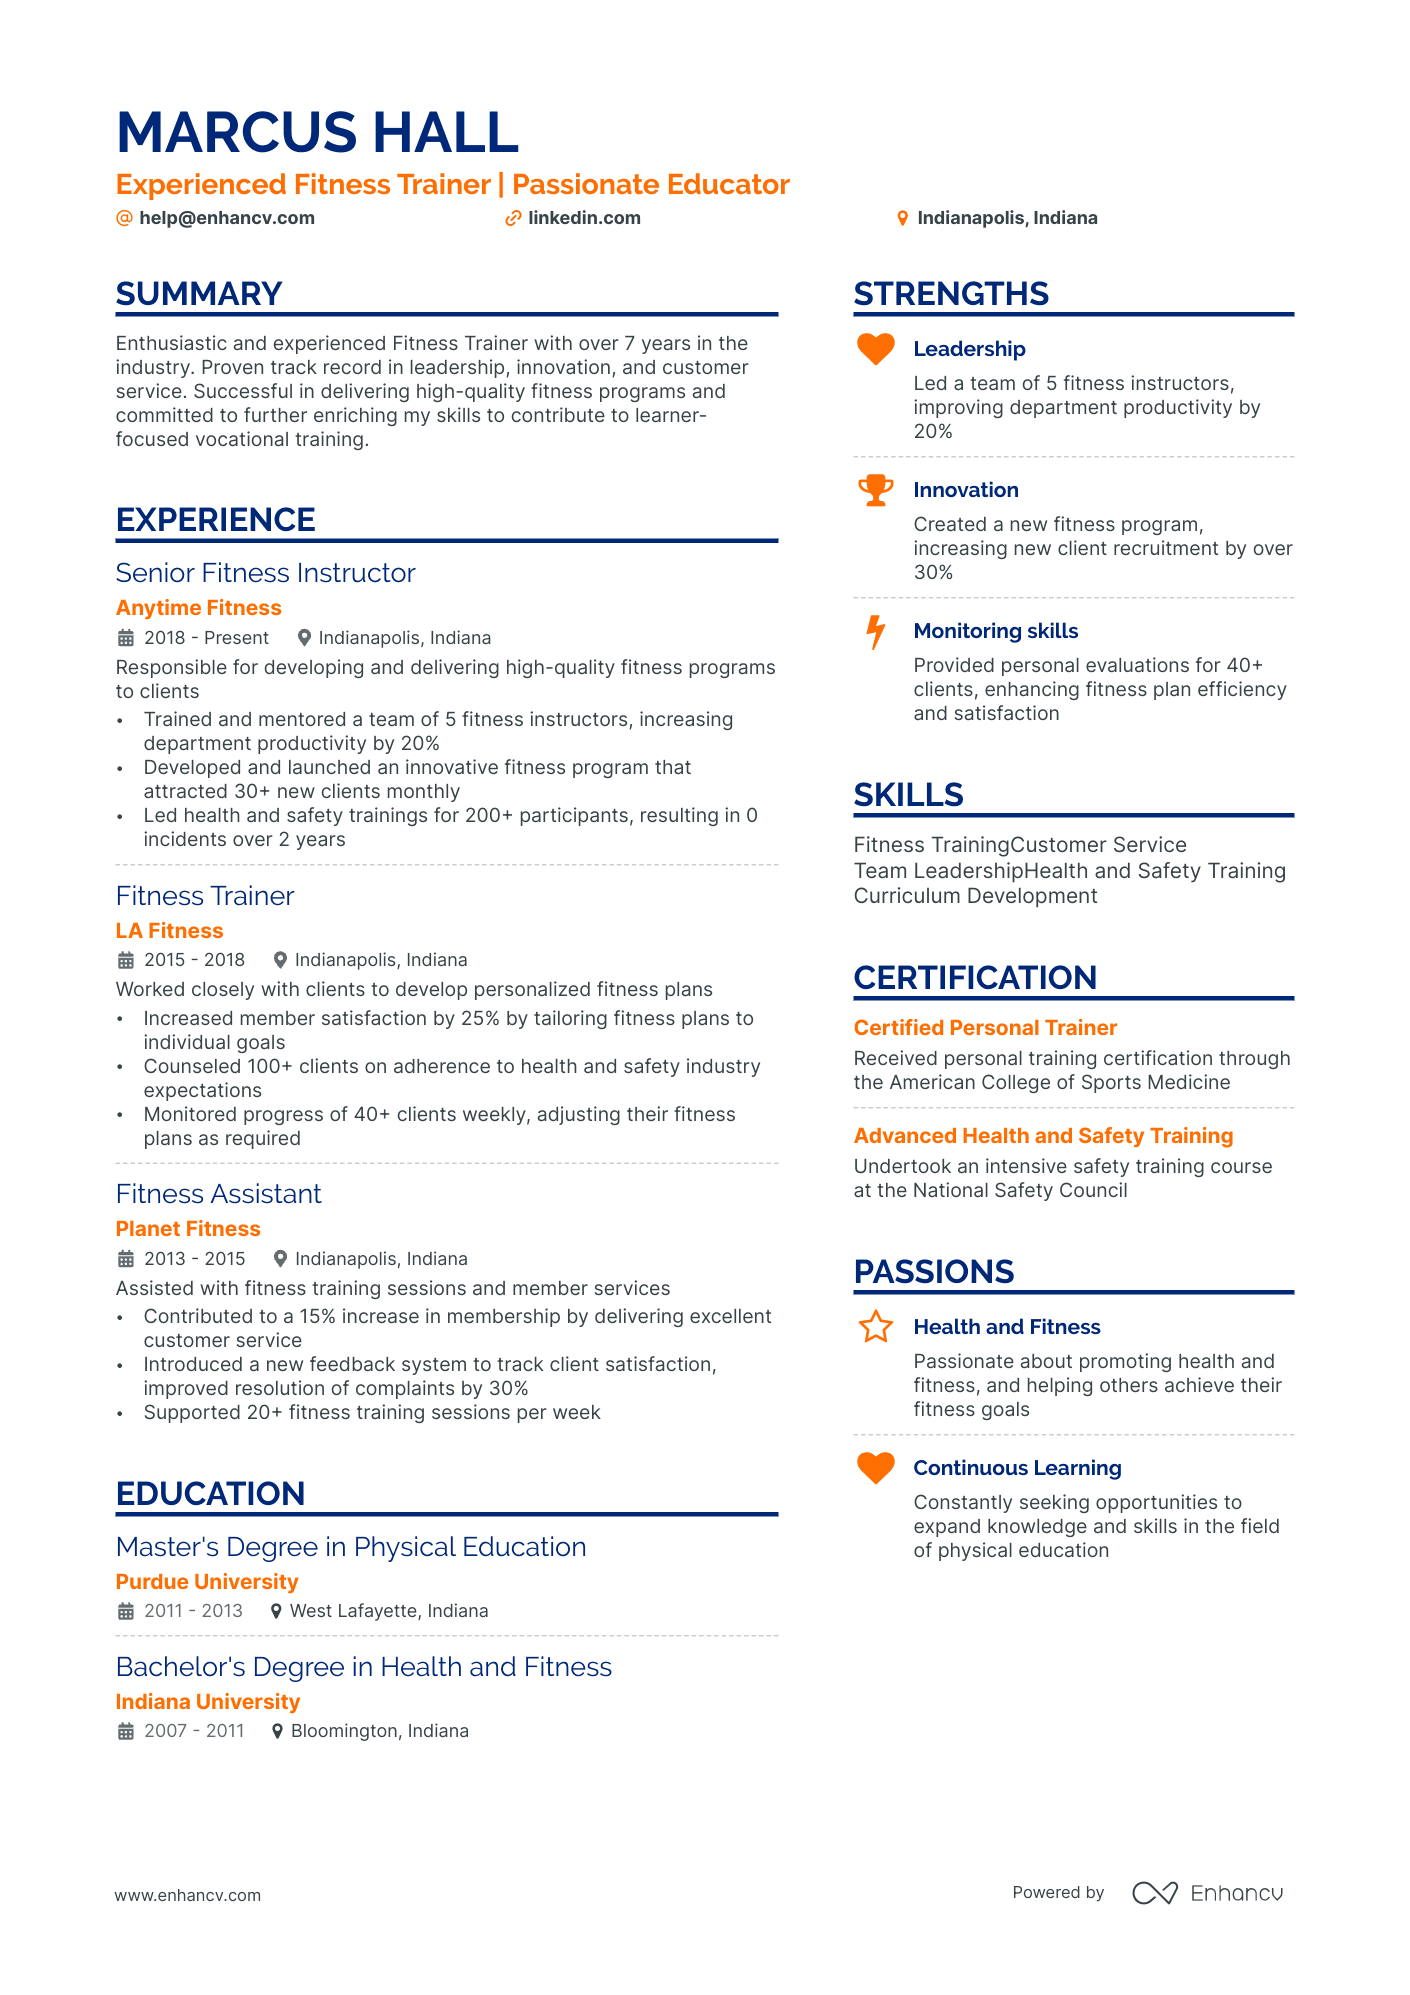 Fitness Trainer resume example